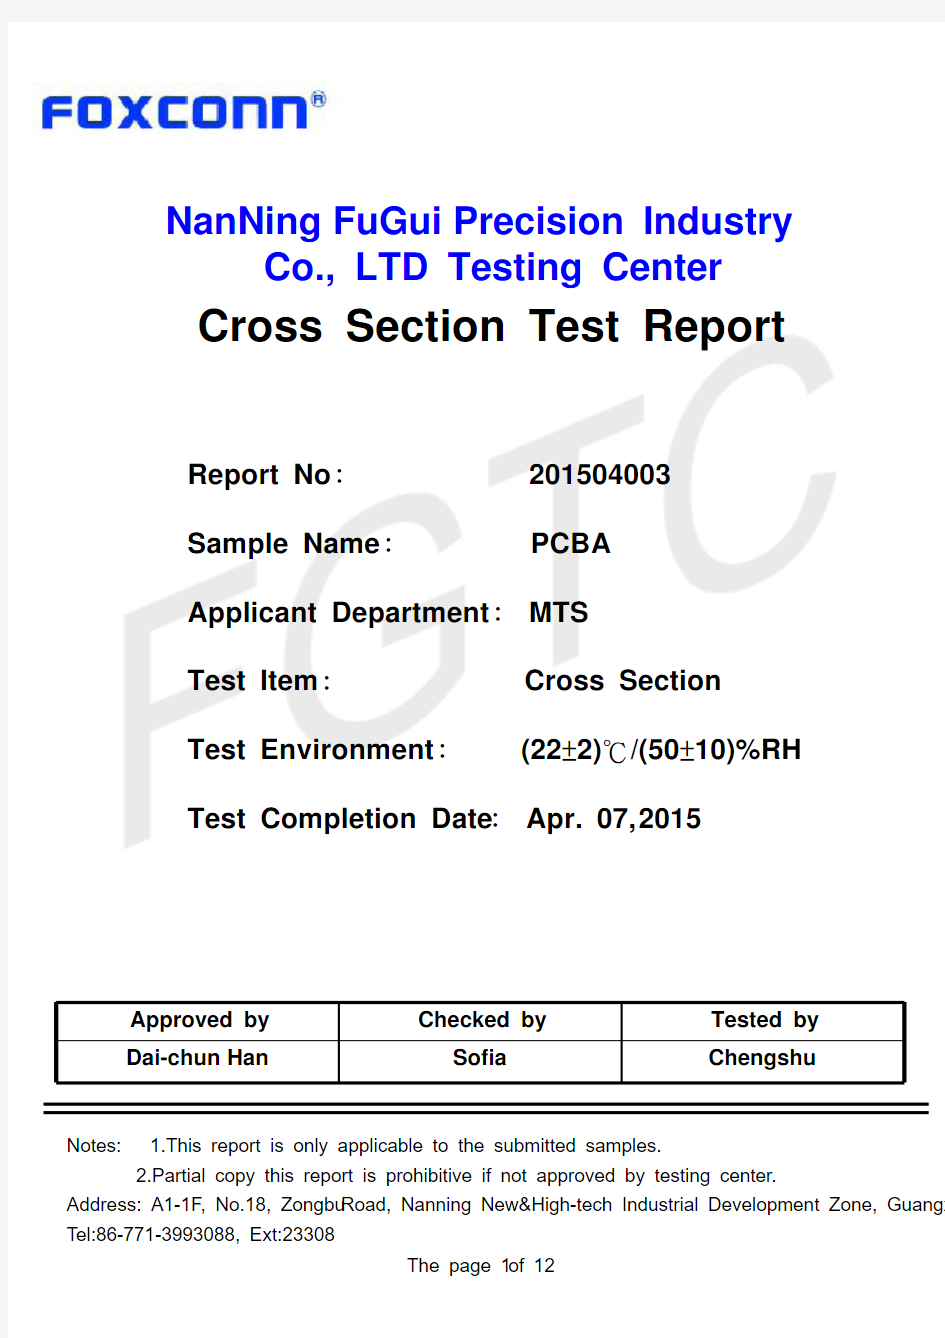 Cross SectionTest Report-201504003